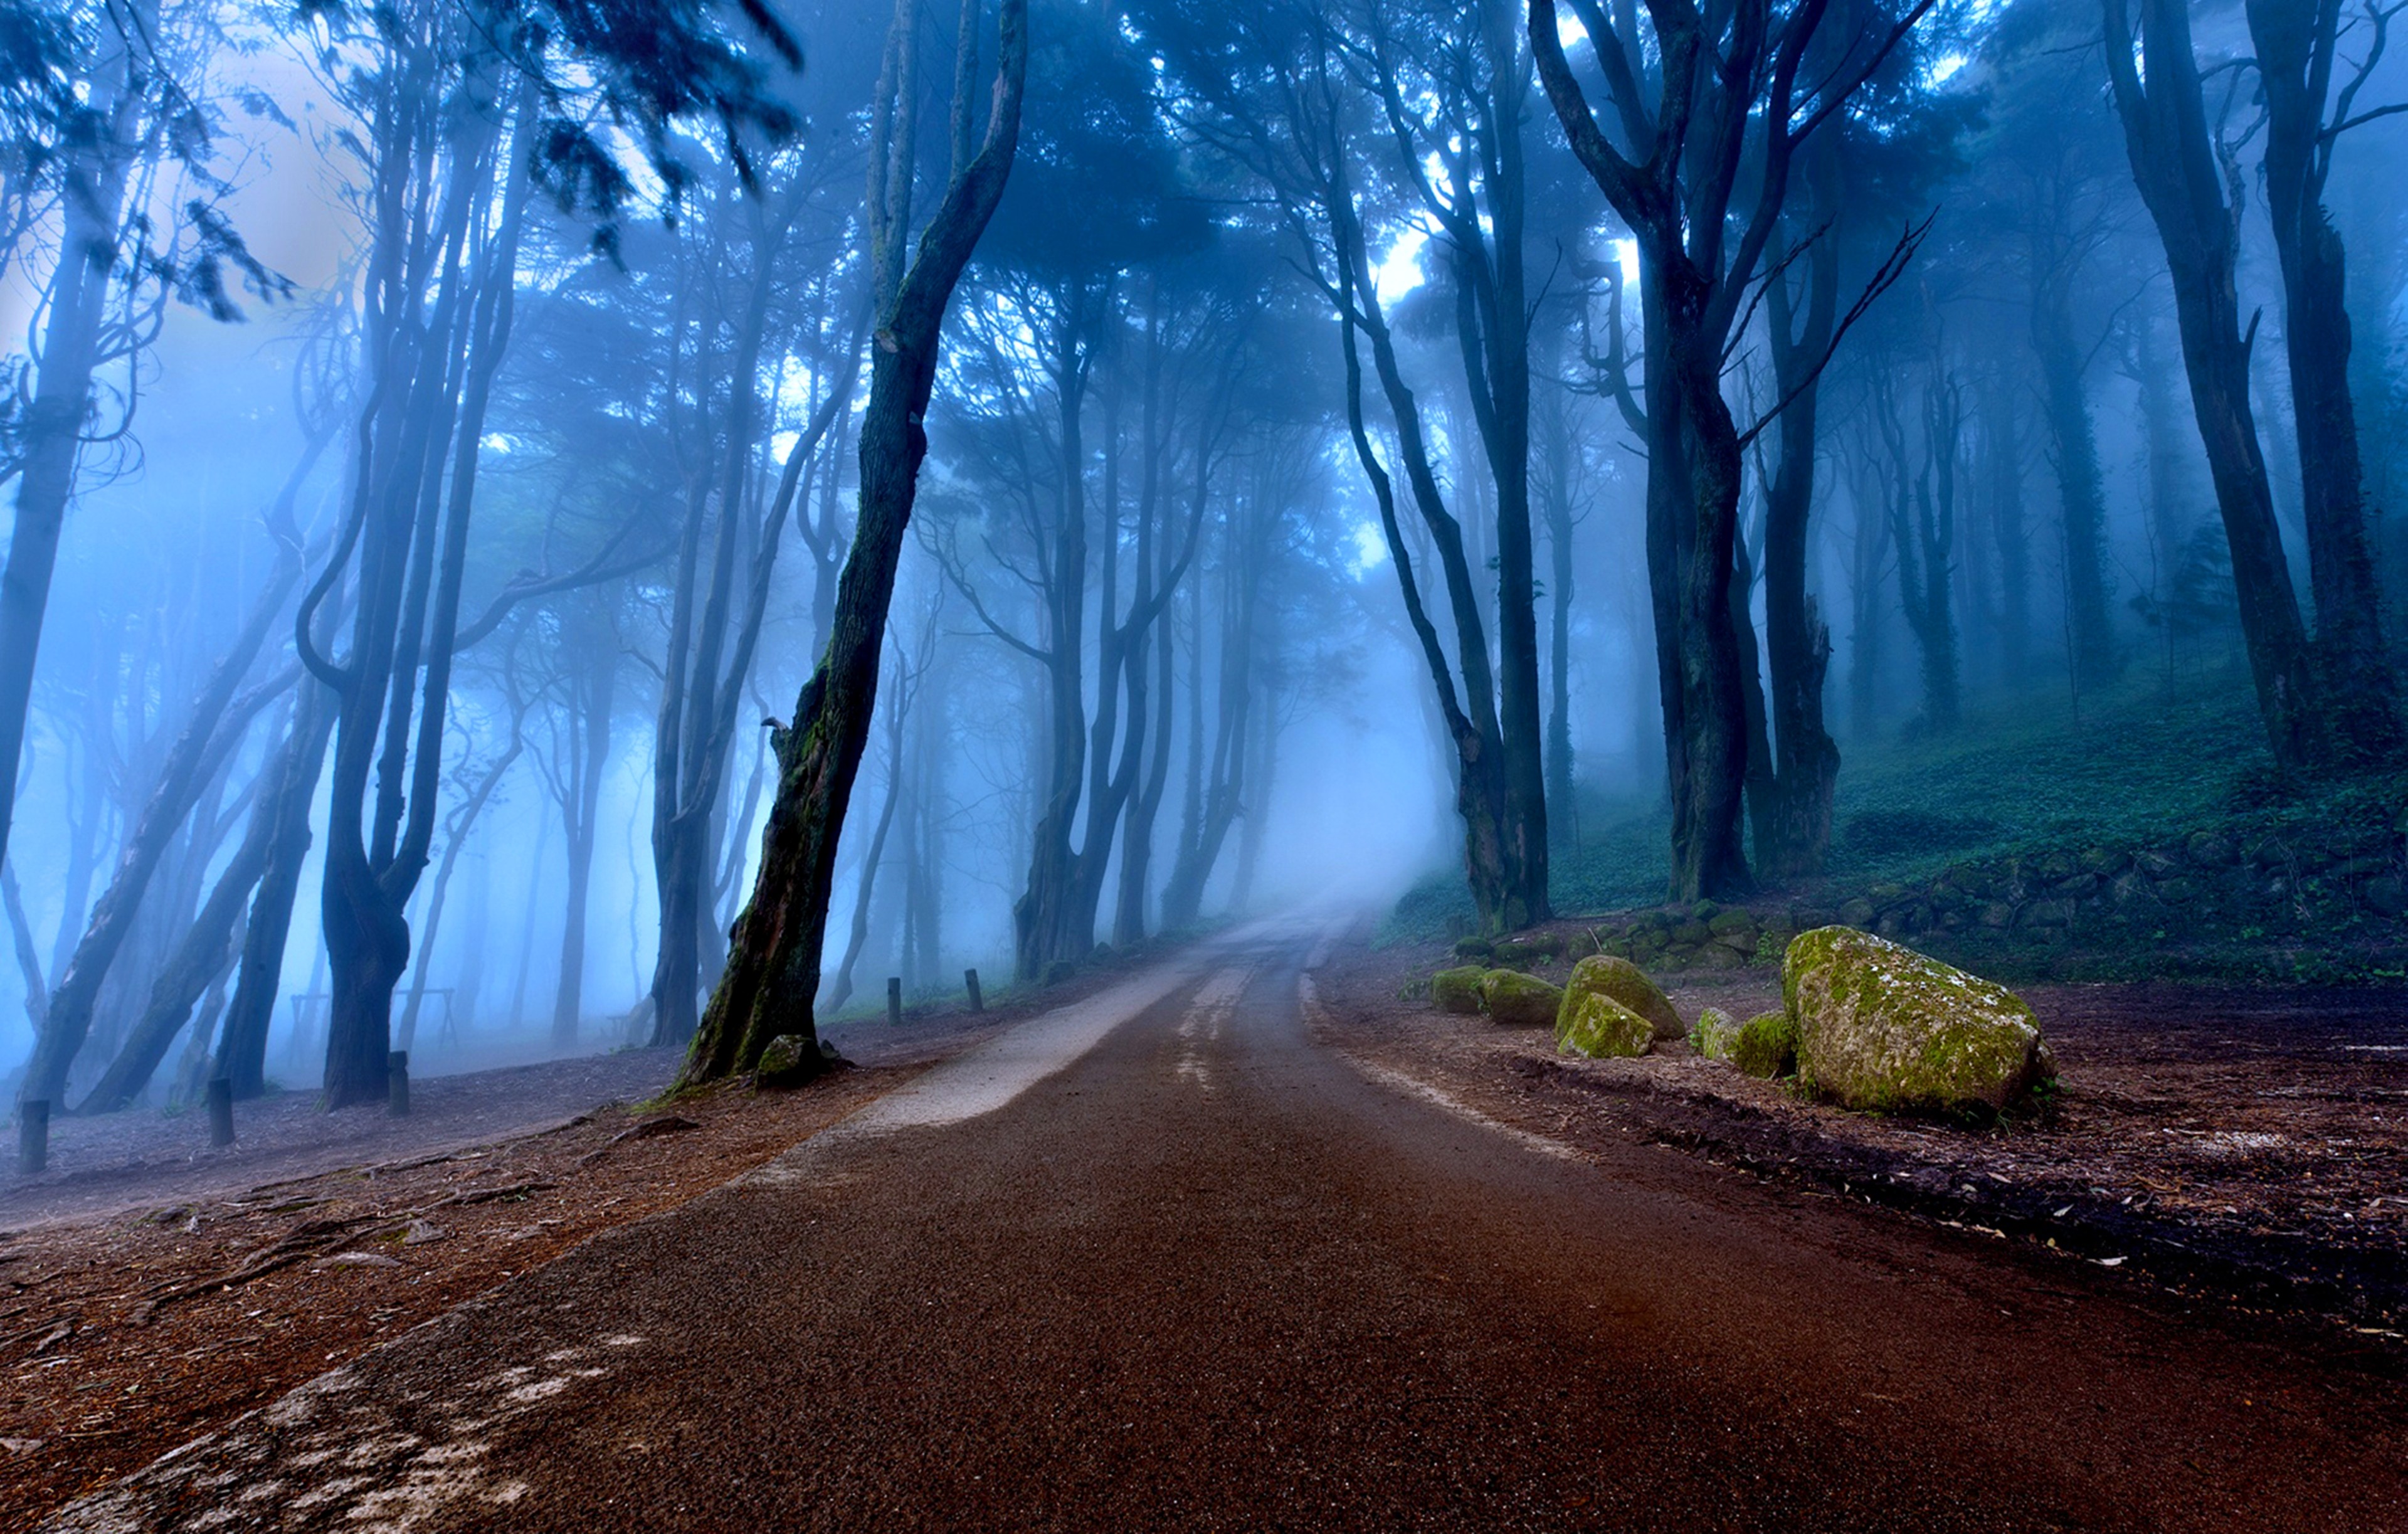 General 3840x2446 road forest trees nature cyan blue mist outdoors